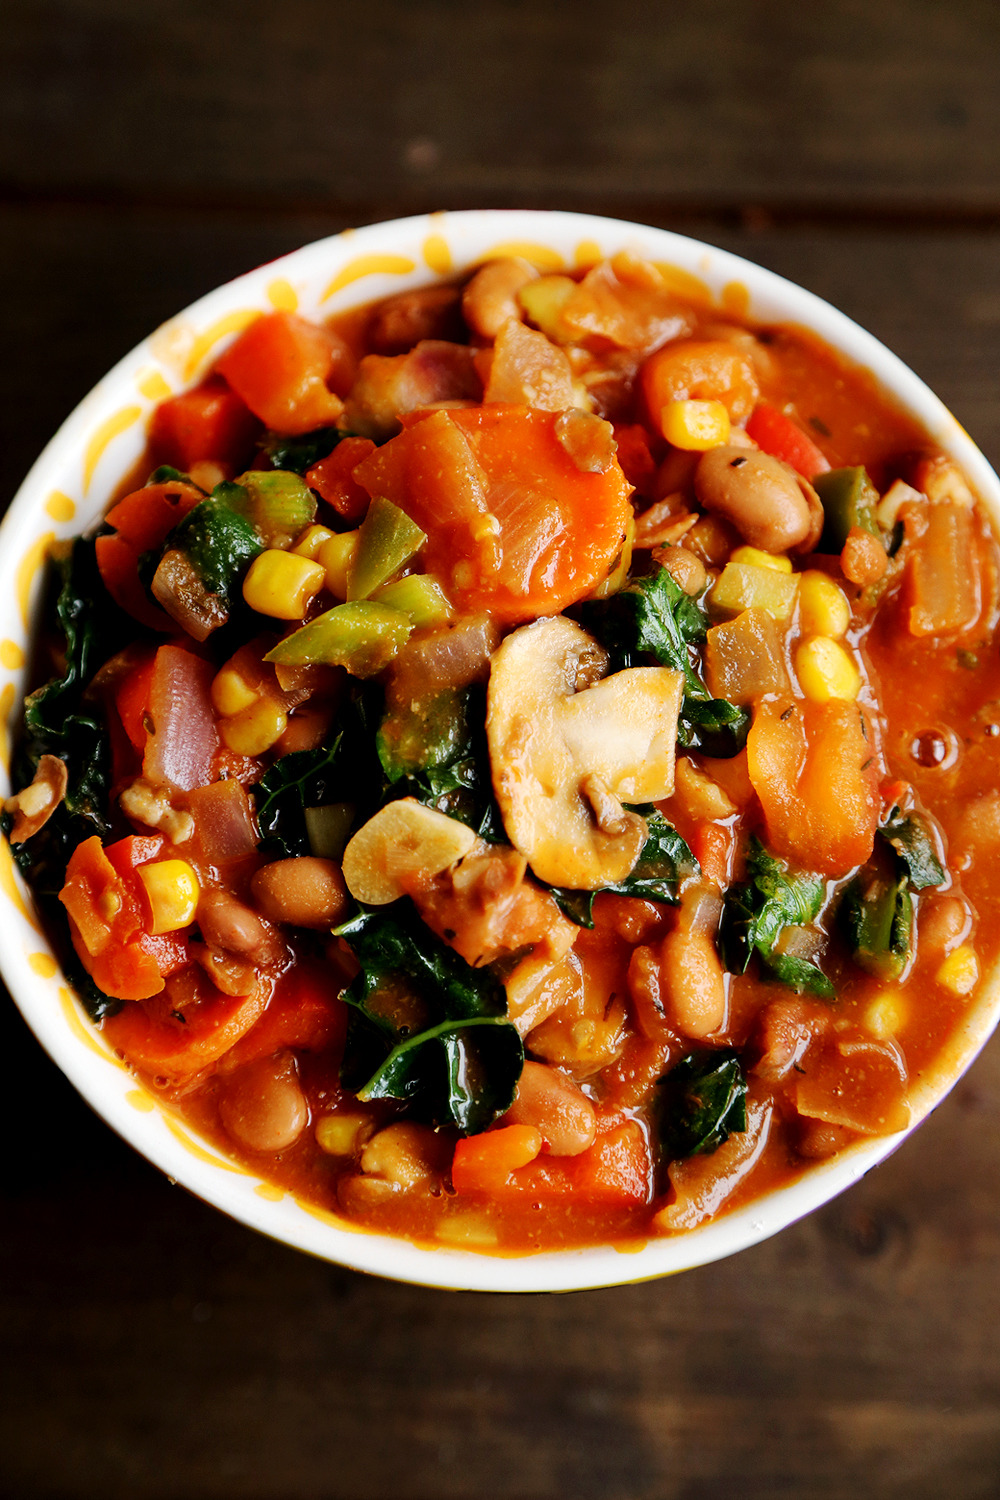 (via Hearty Rainbow Vegetable Stew - Favourite... - A collection of ...